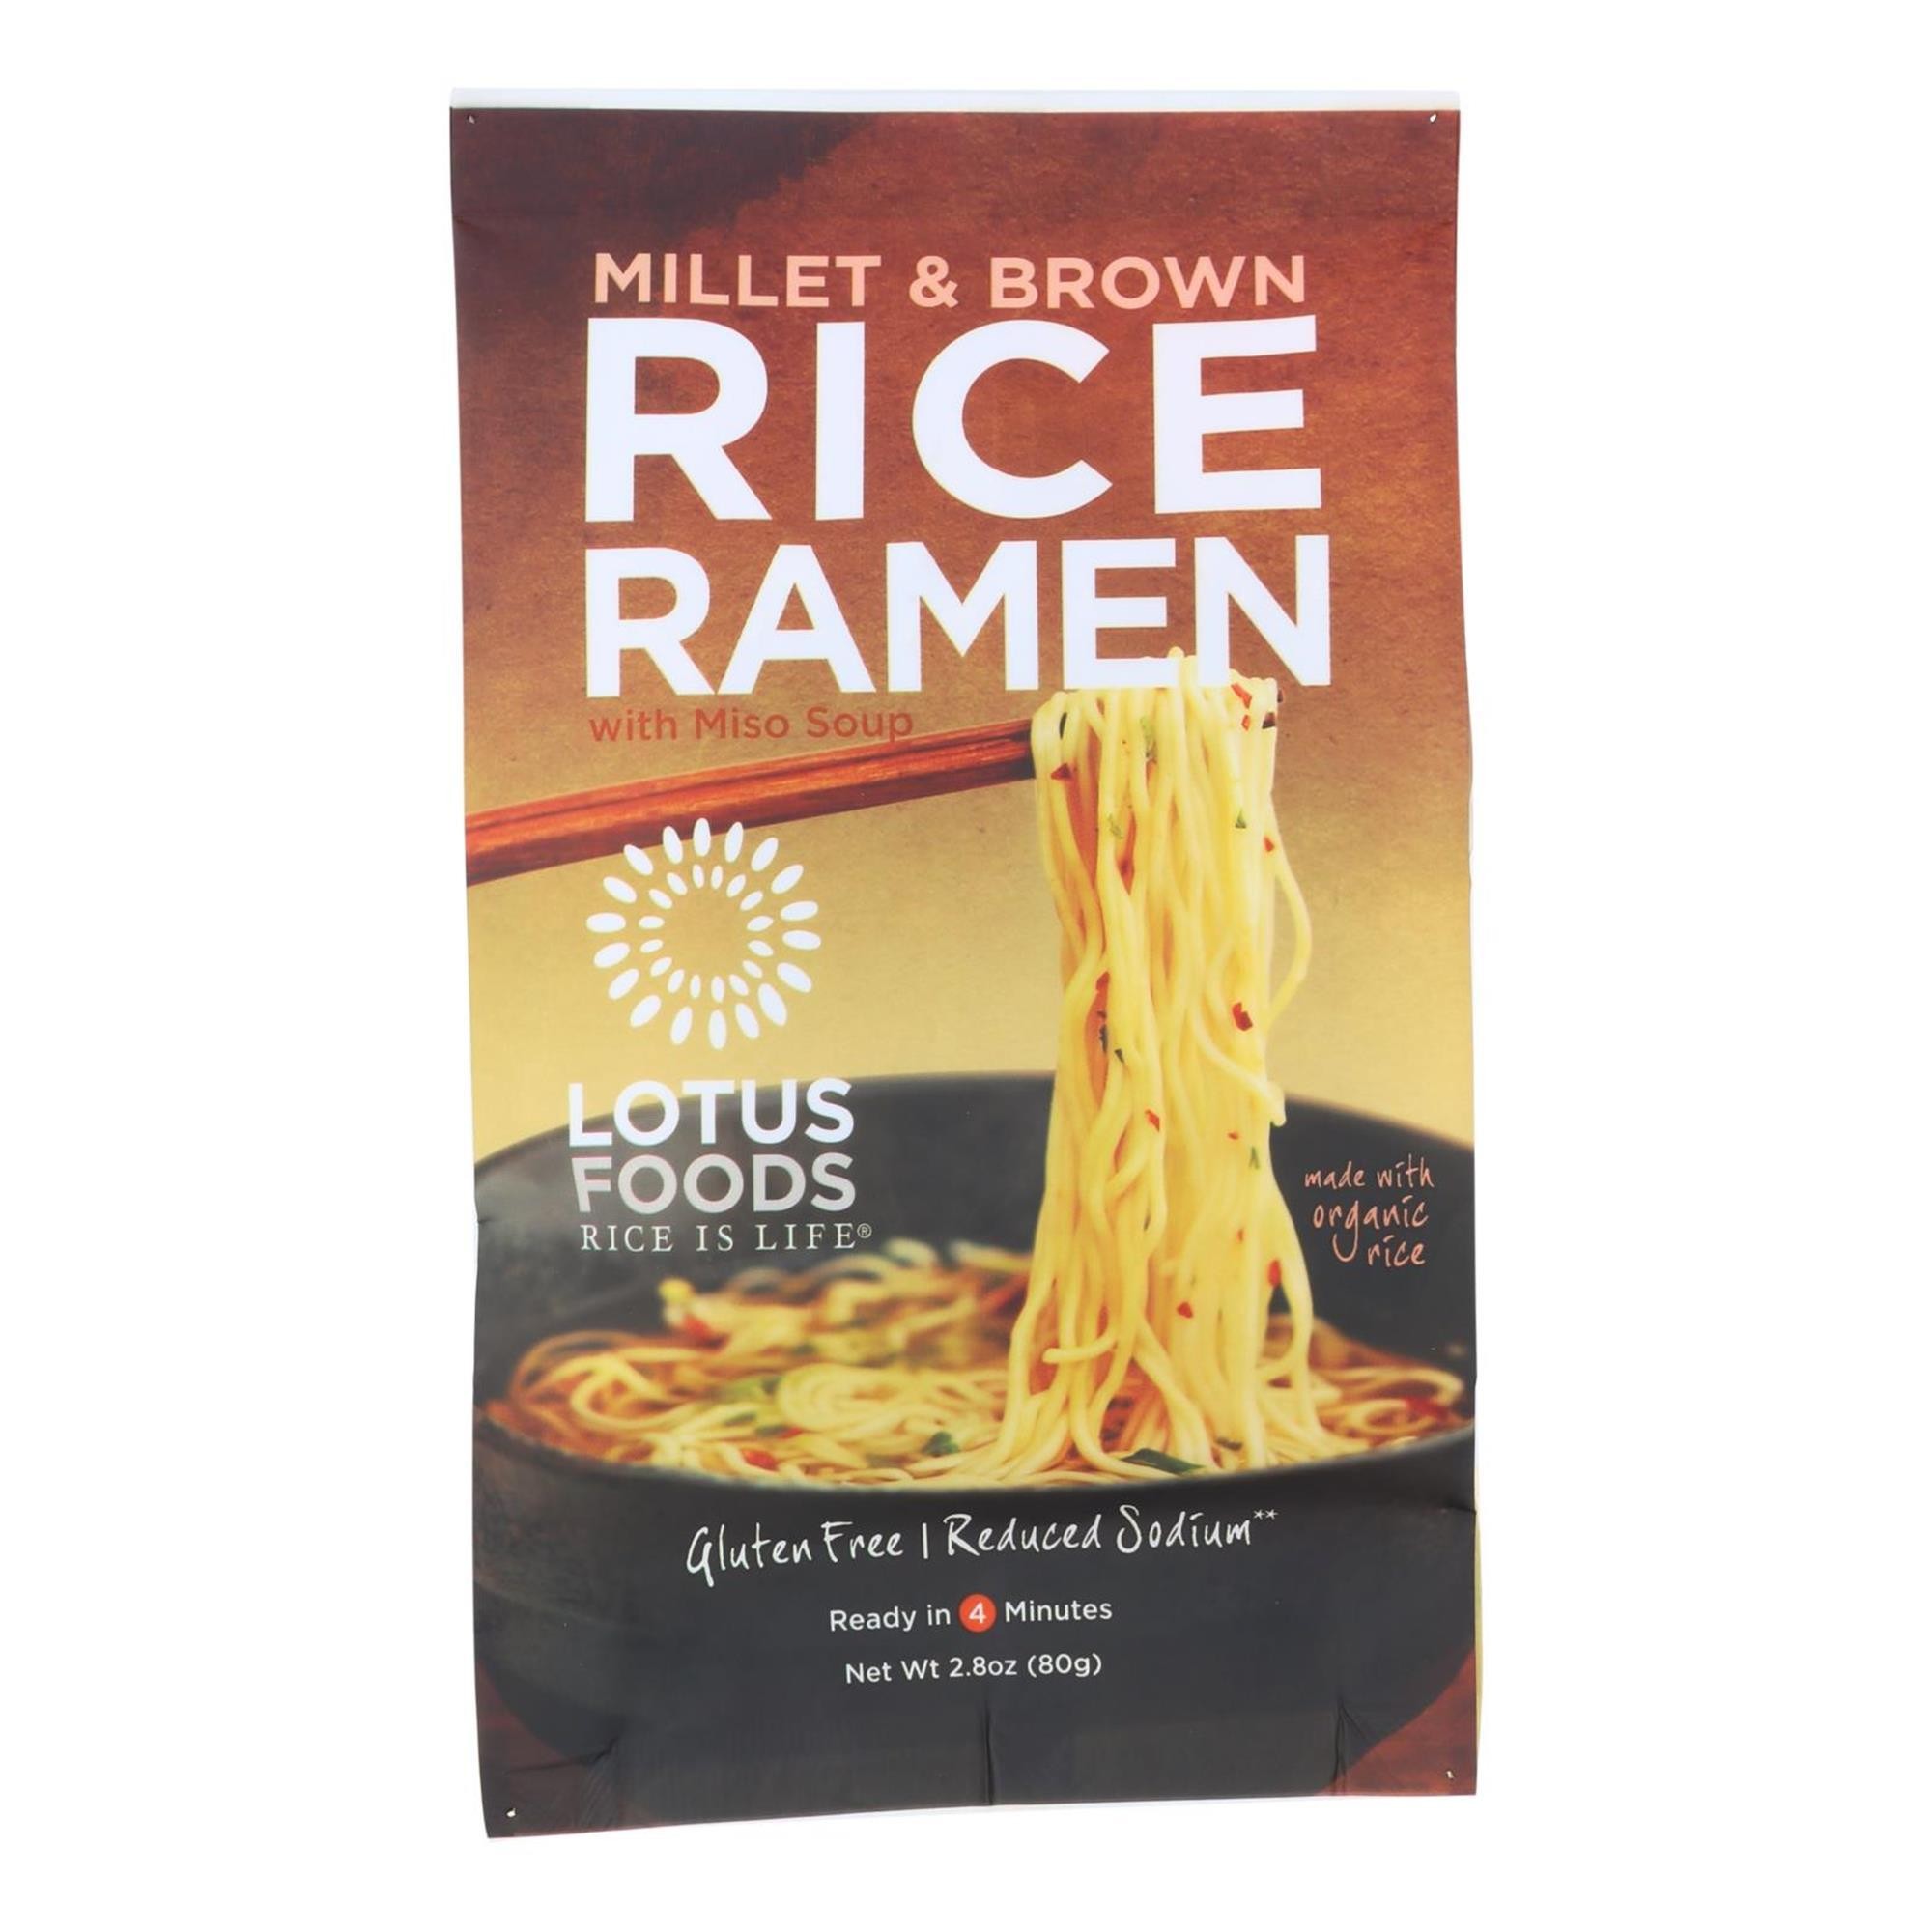 2-Pack Lotus Foods Gluten-Free Millet & Brown Rice Ramen with Miso Soup 2.8 Oz Container